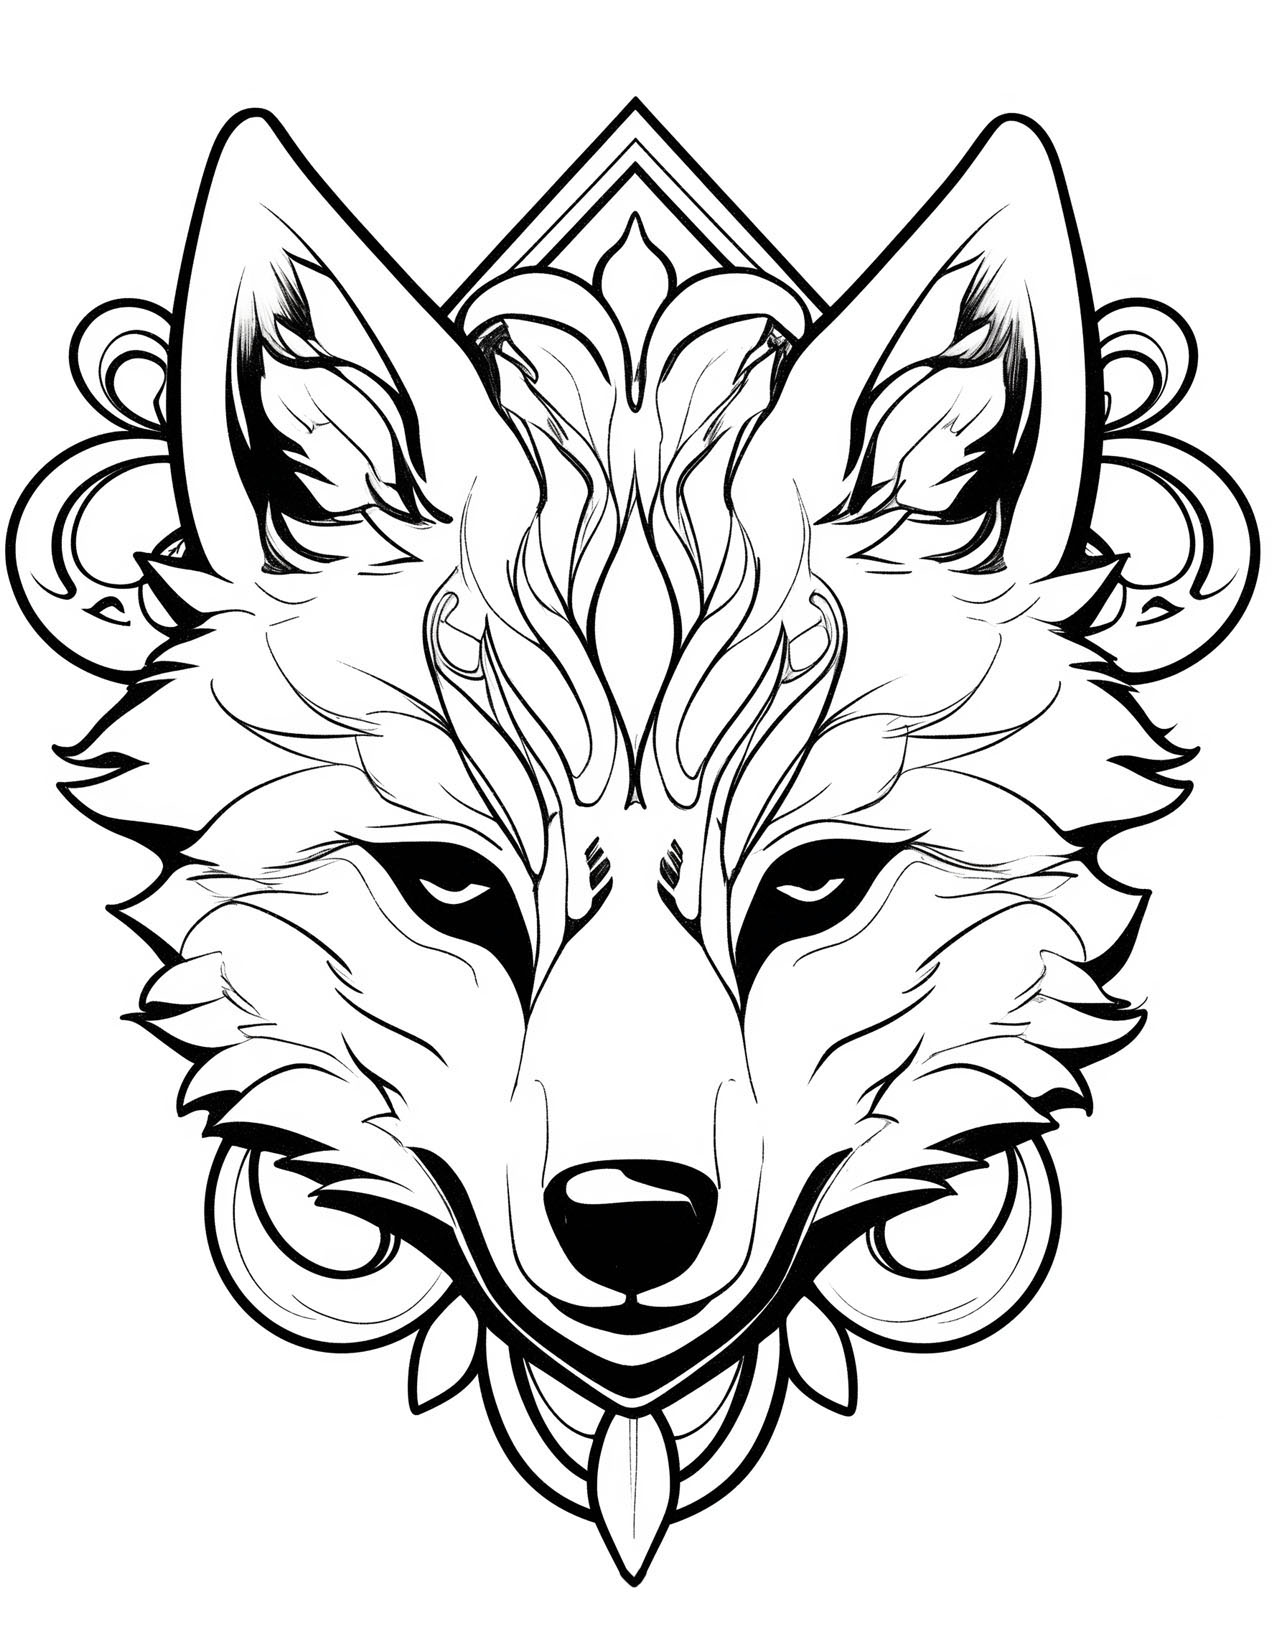 Creative fox coloring pages for kids and adults